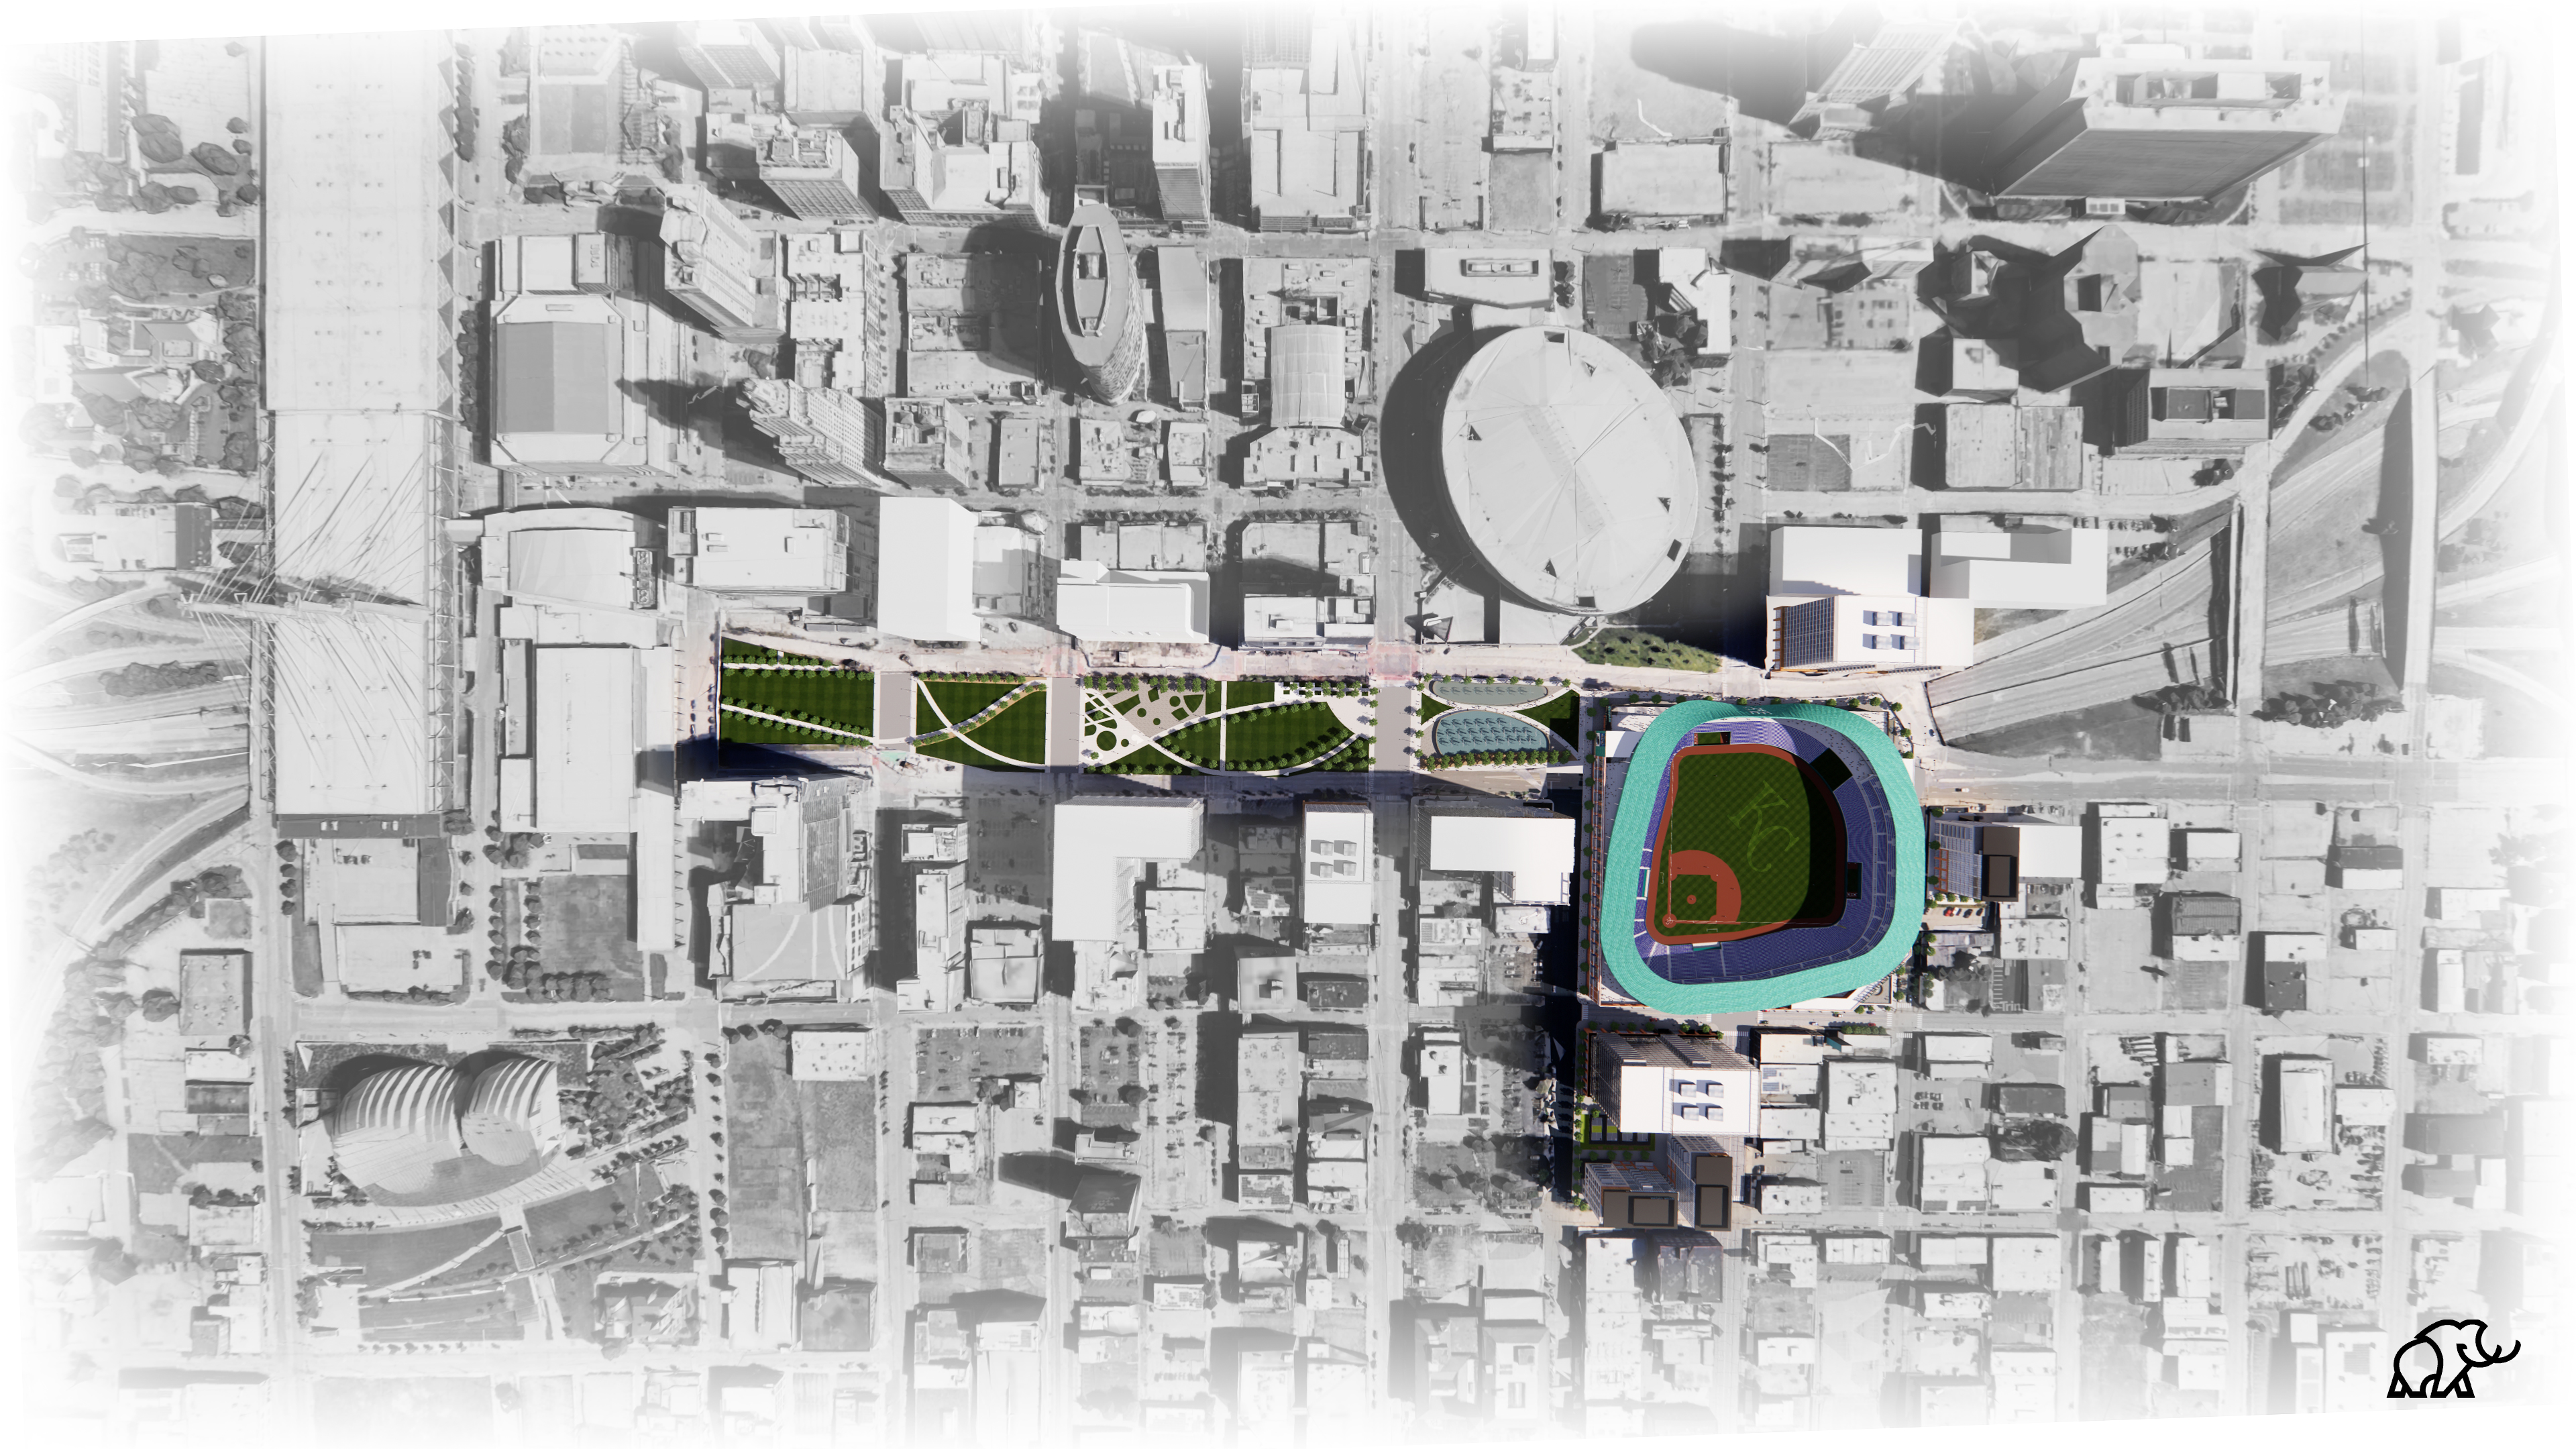 Proposed ballpark would stretch over I-670, be built on site of